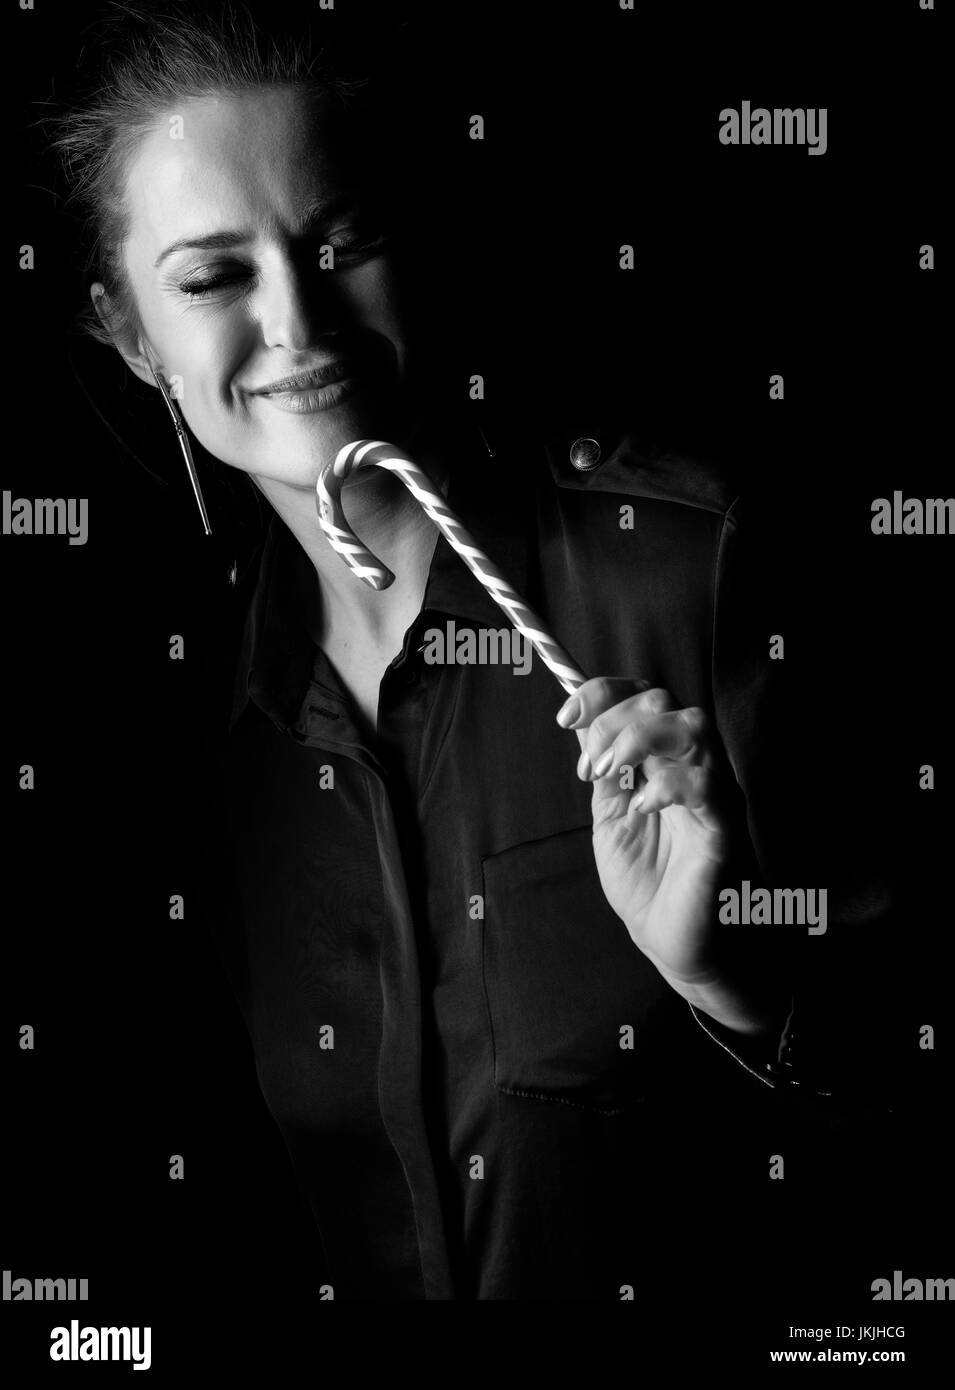 Сoming out into the light. smiling woman in the dark dress isolated on black enjoying christmas candy cane Stock Photo